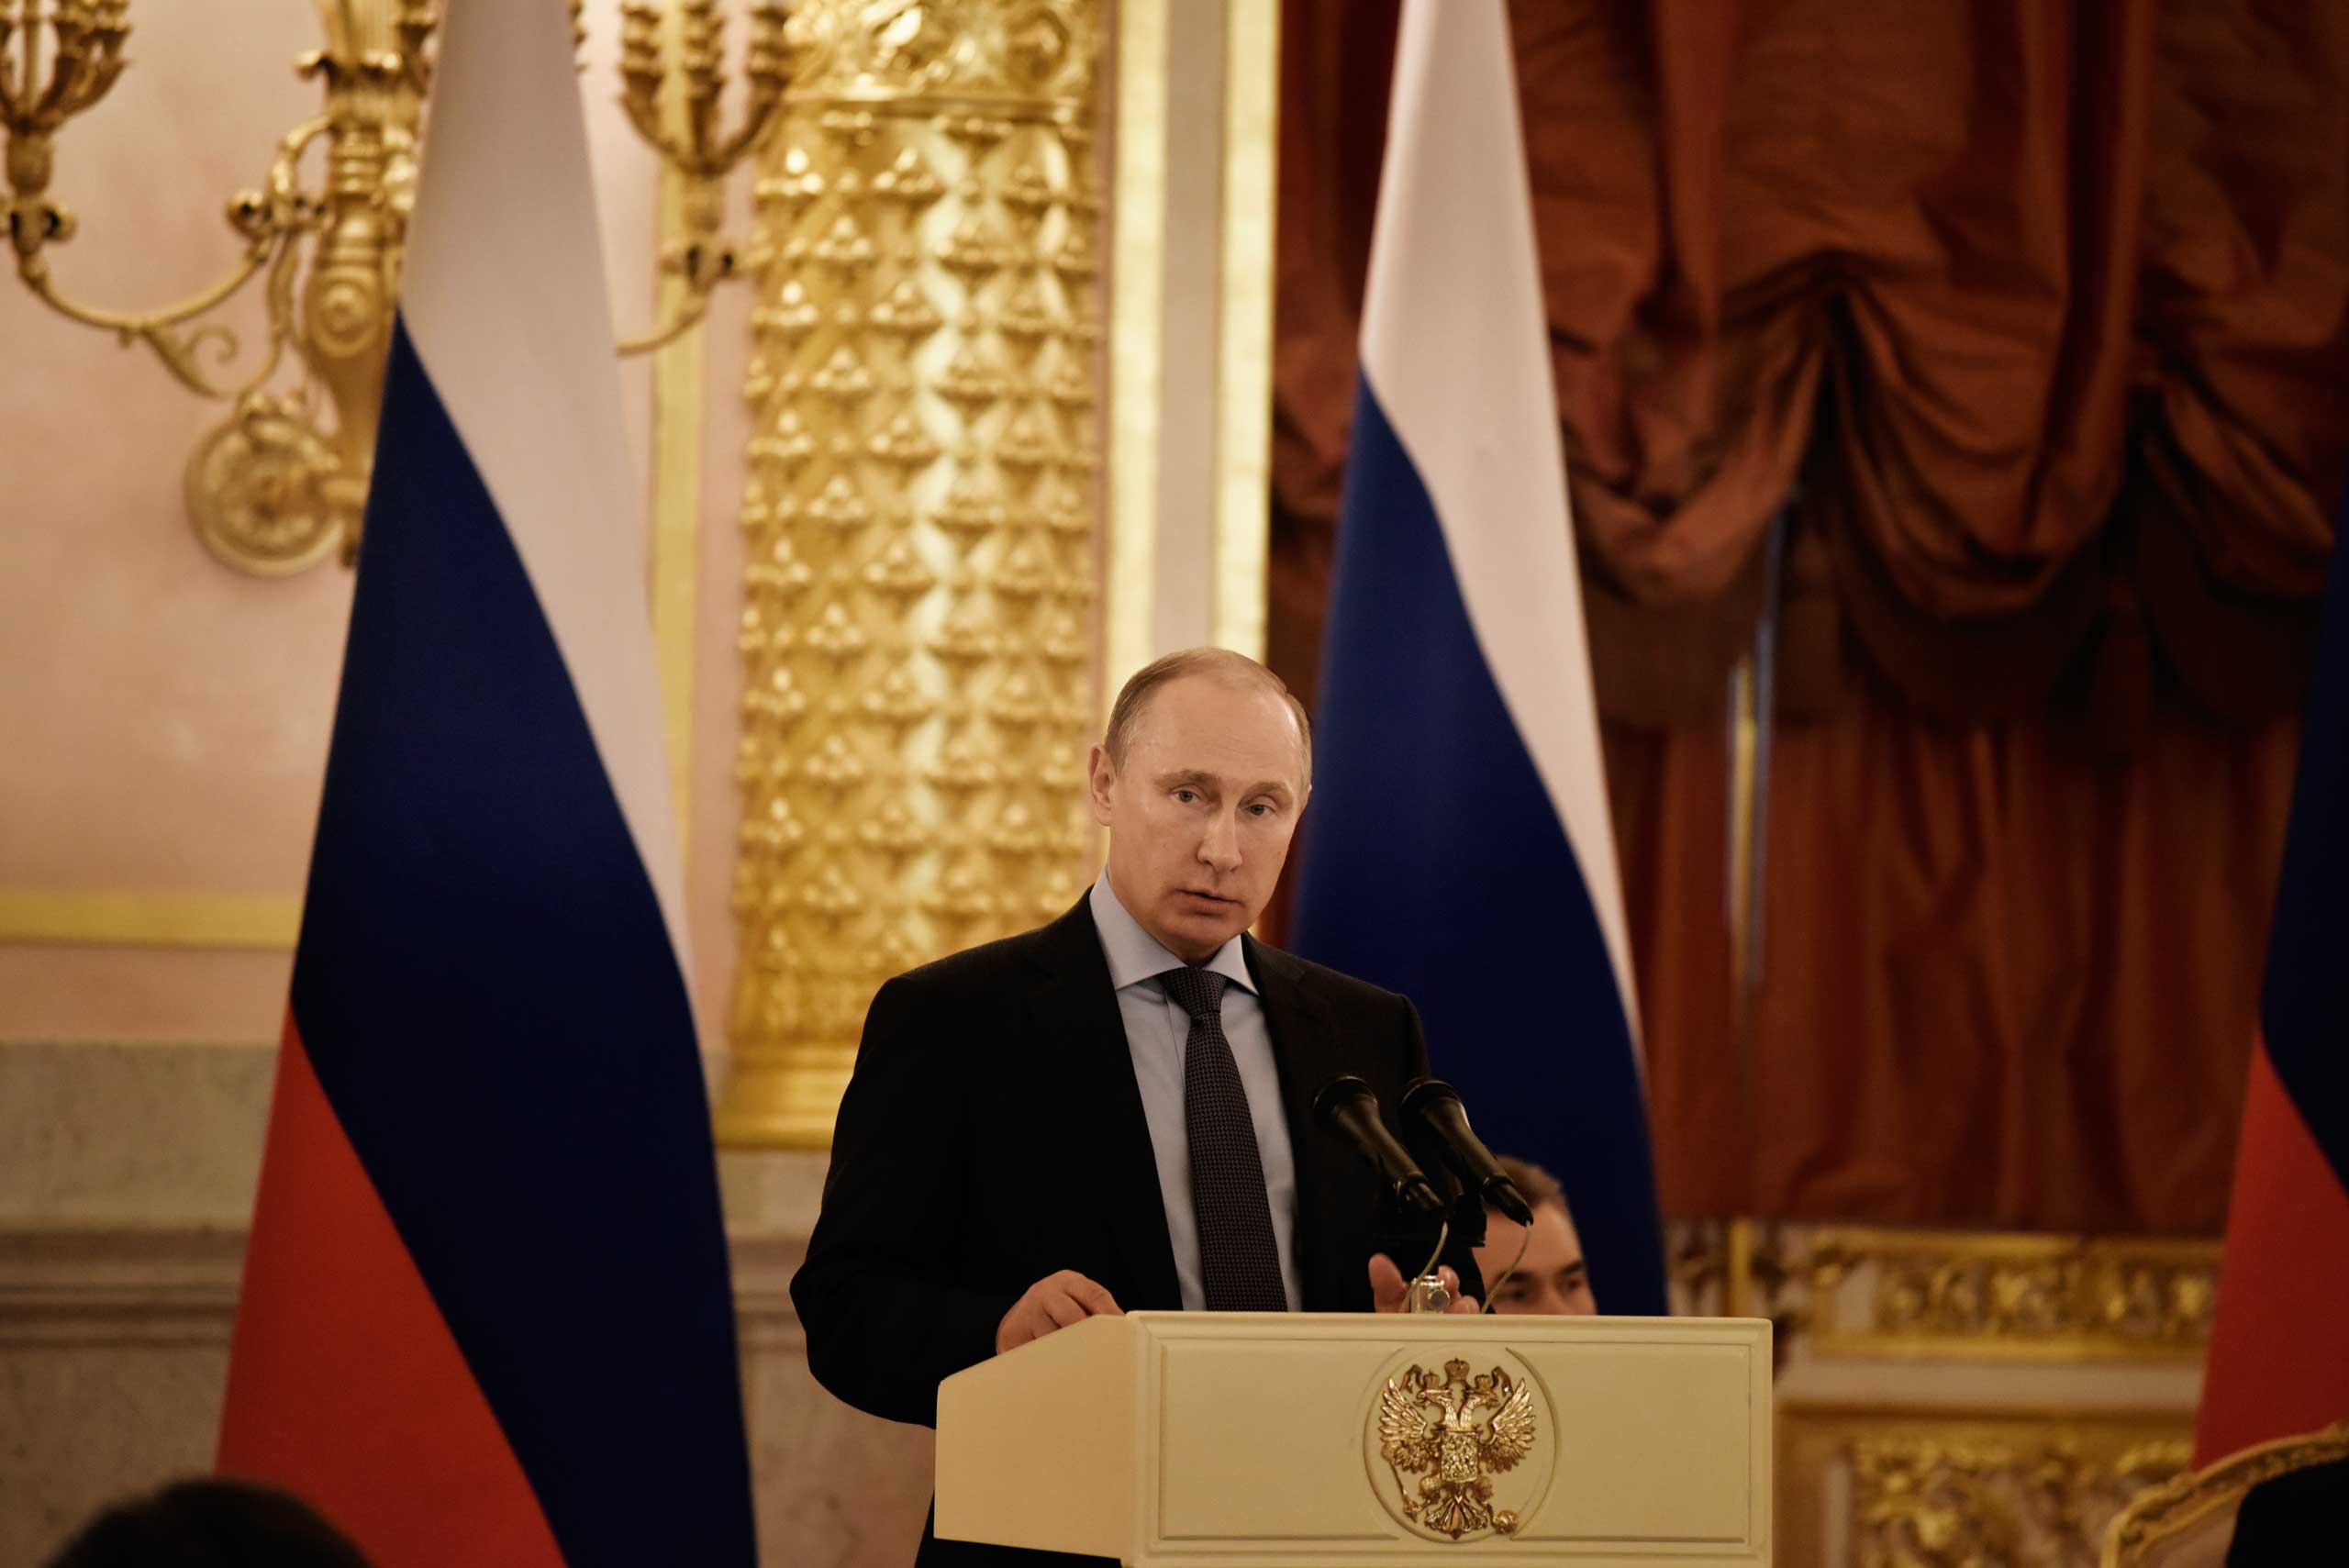 President Vladimir Putin speaks during his meeting with Human Rights activists in the Grand Kremlin Palace, Moscow, Dec. 5, 2014. (Yuri Kozyrev—Noor for TIME)